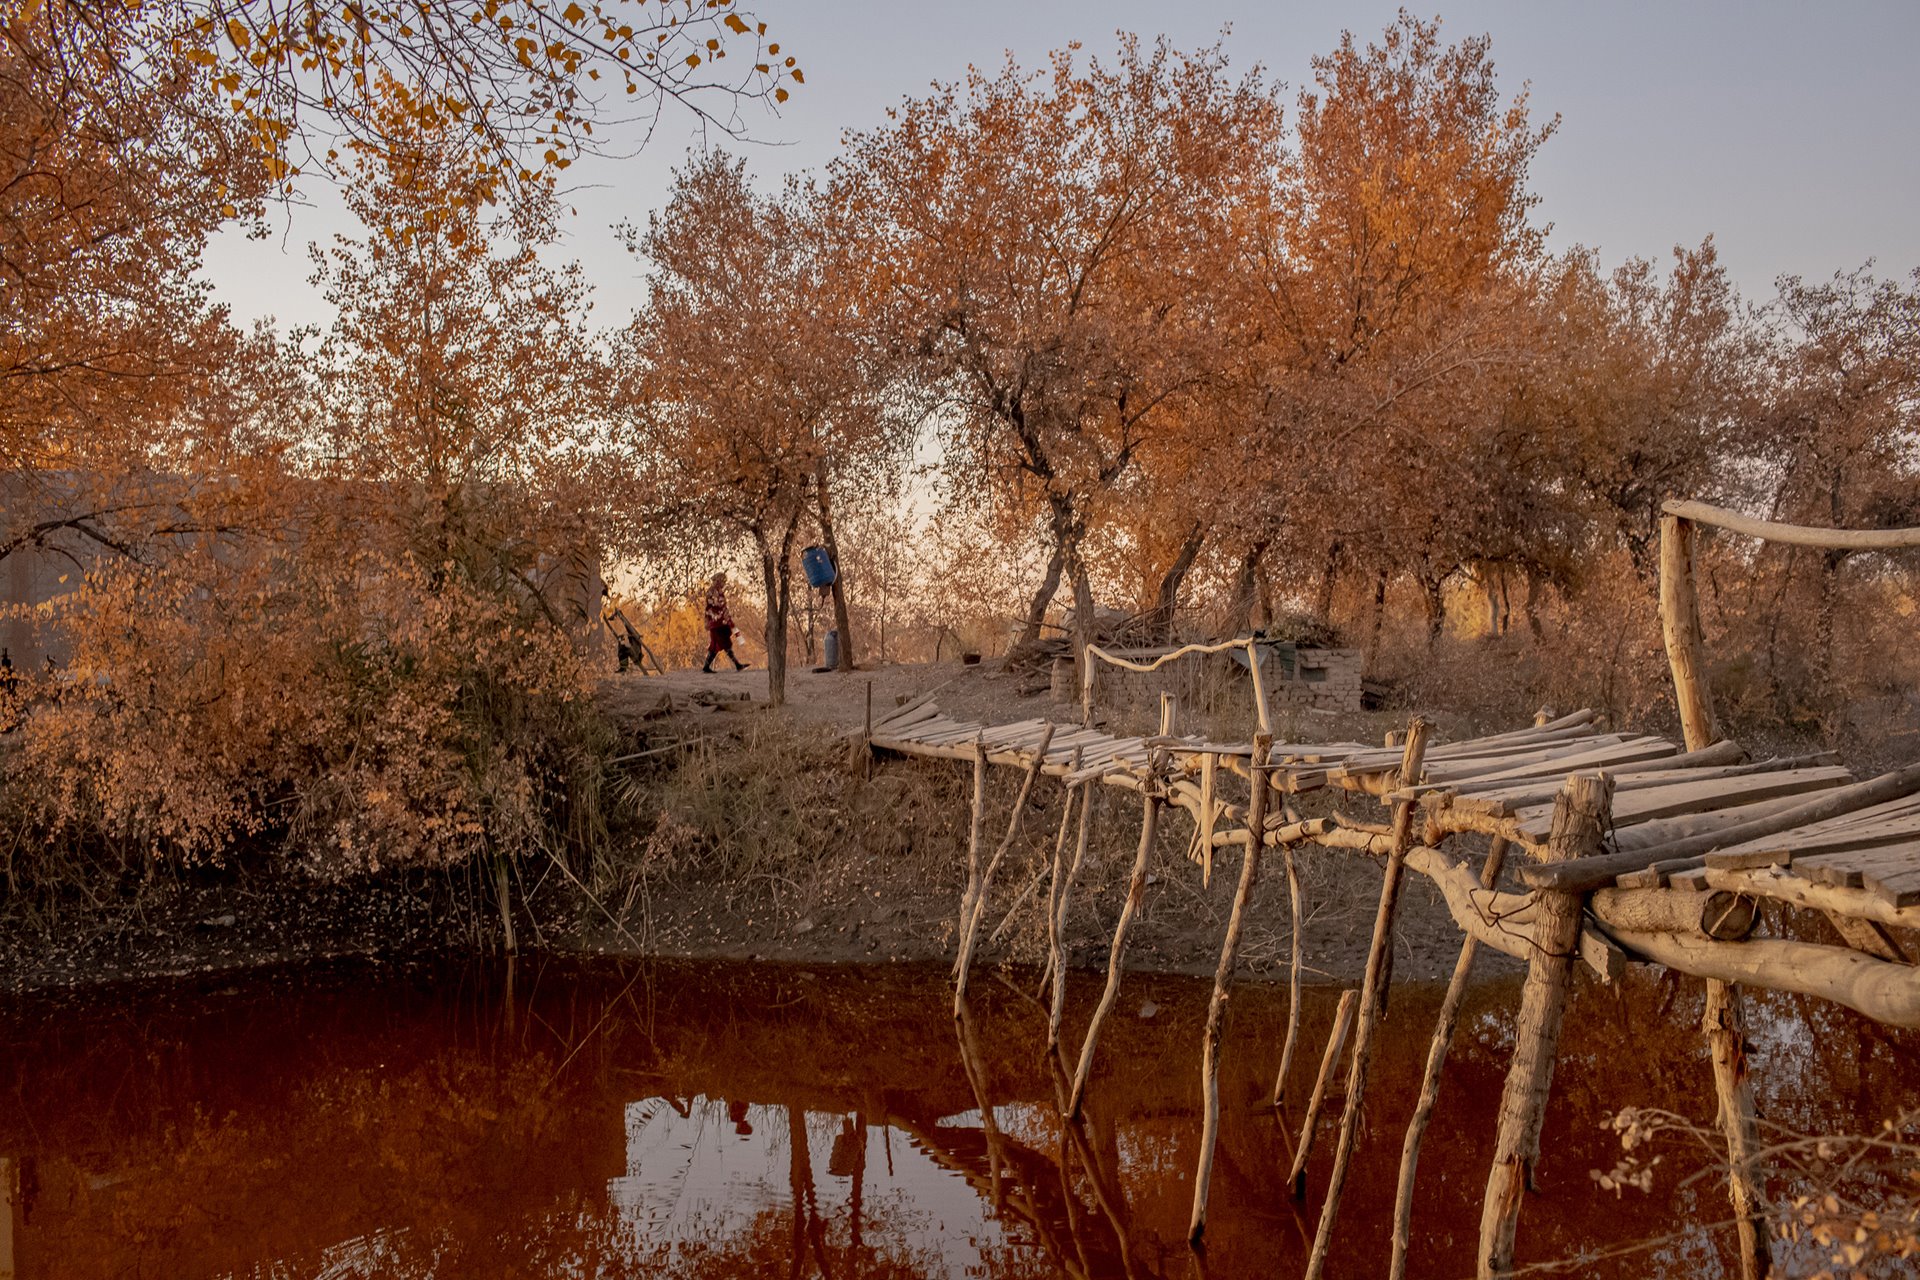 Silt in the Amu Darya in Uzbekistan gives the water a dark red color, as water levels in the river continue to decrease.